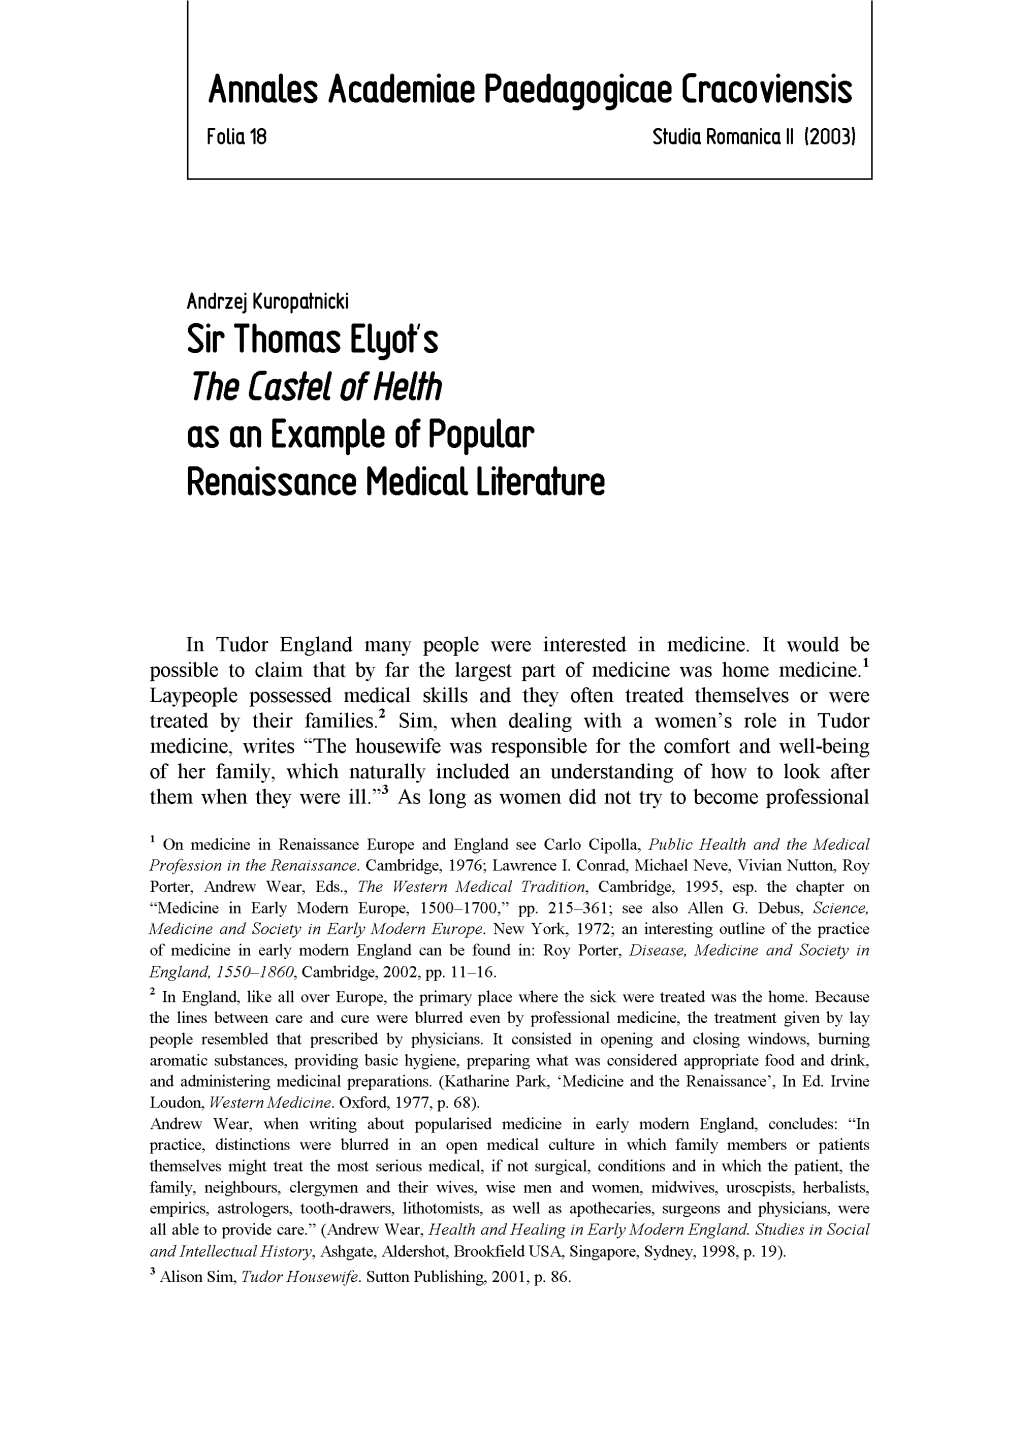 Sir Thomas Elyot's the Castel of Helth As an Example of Popular